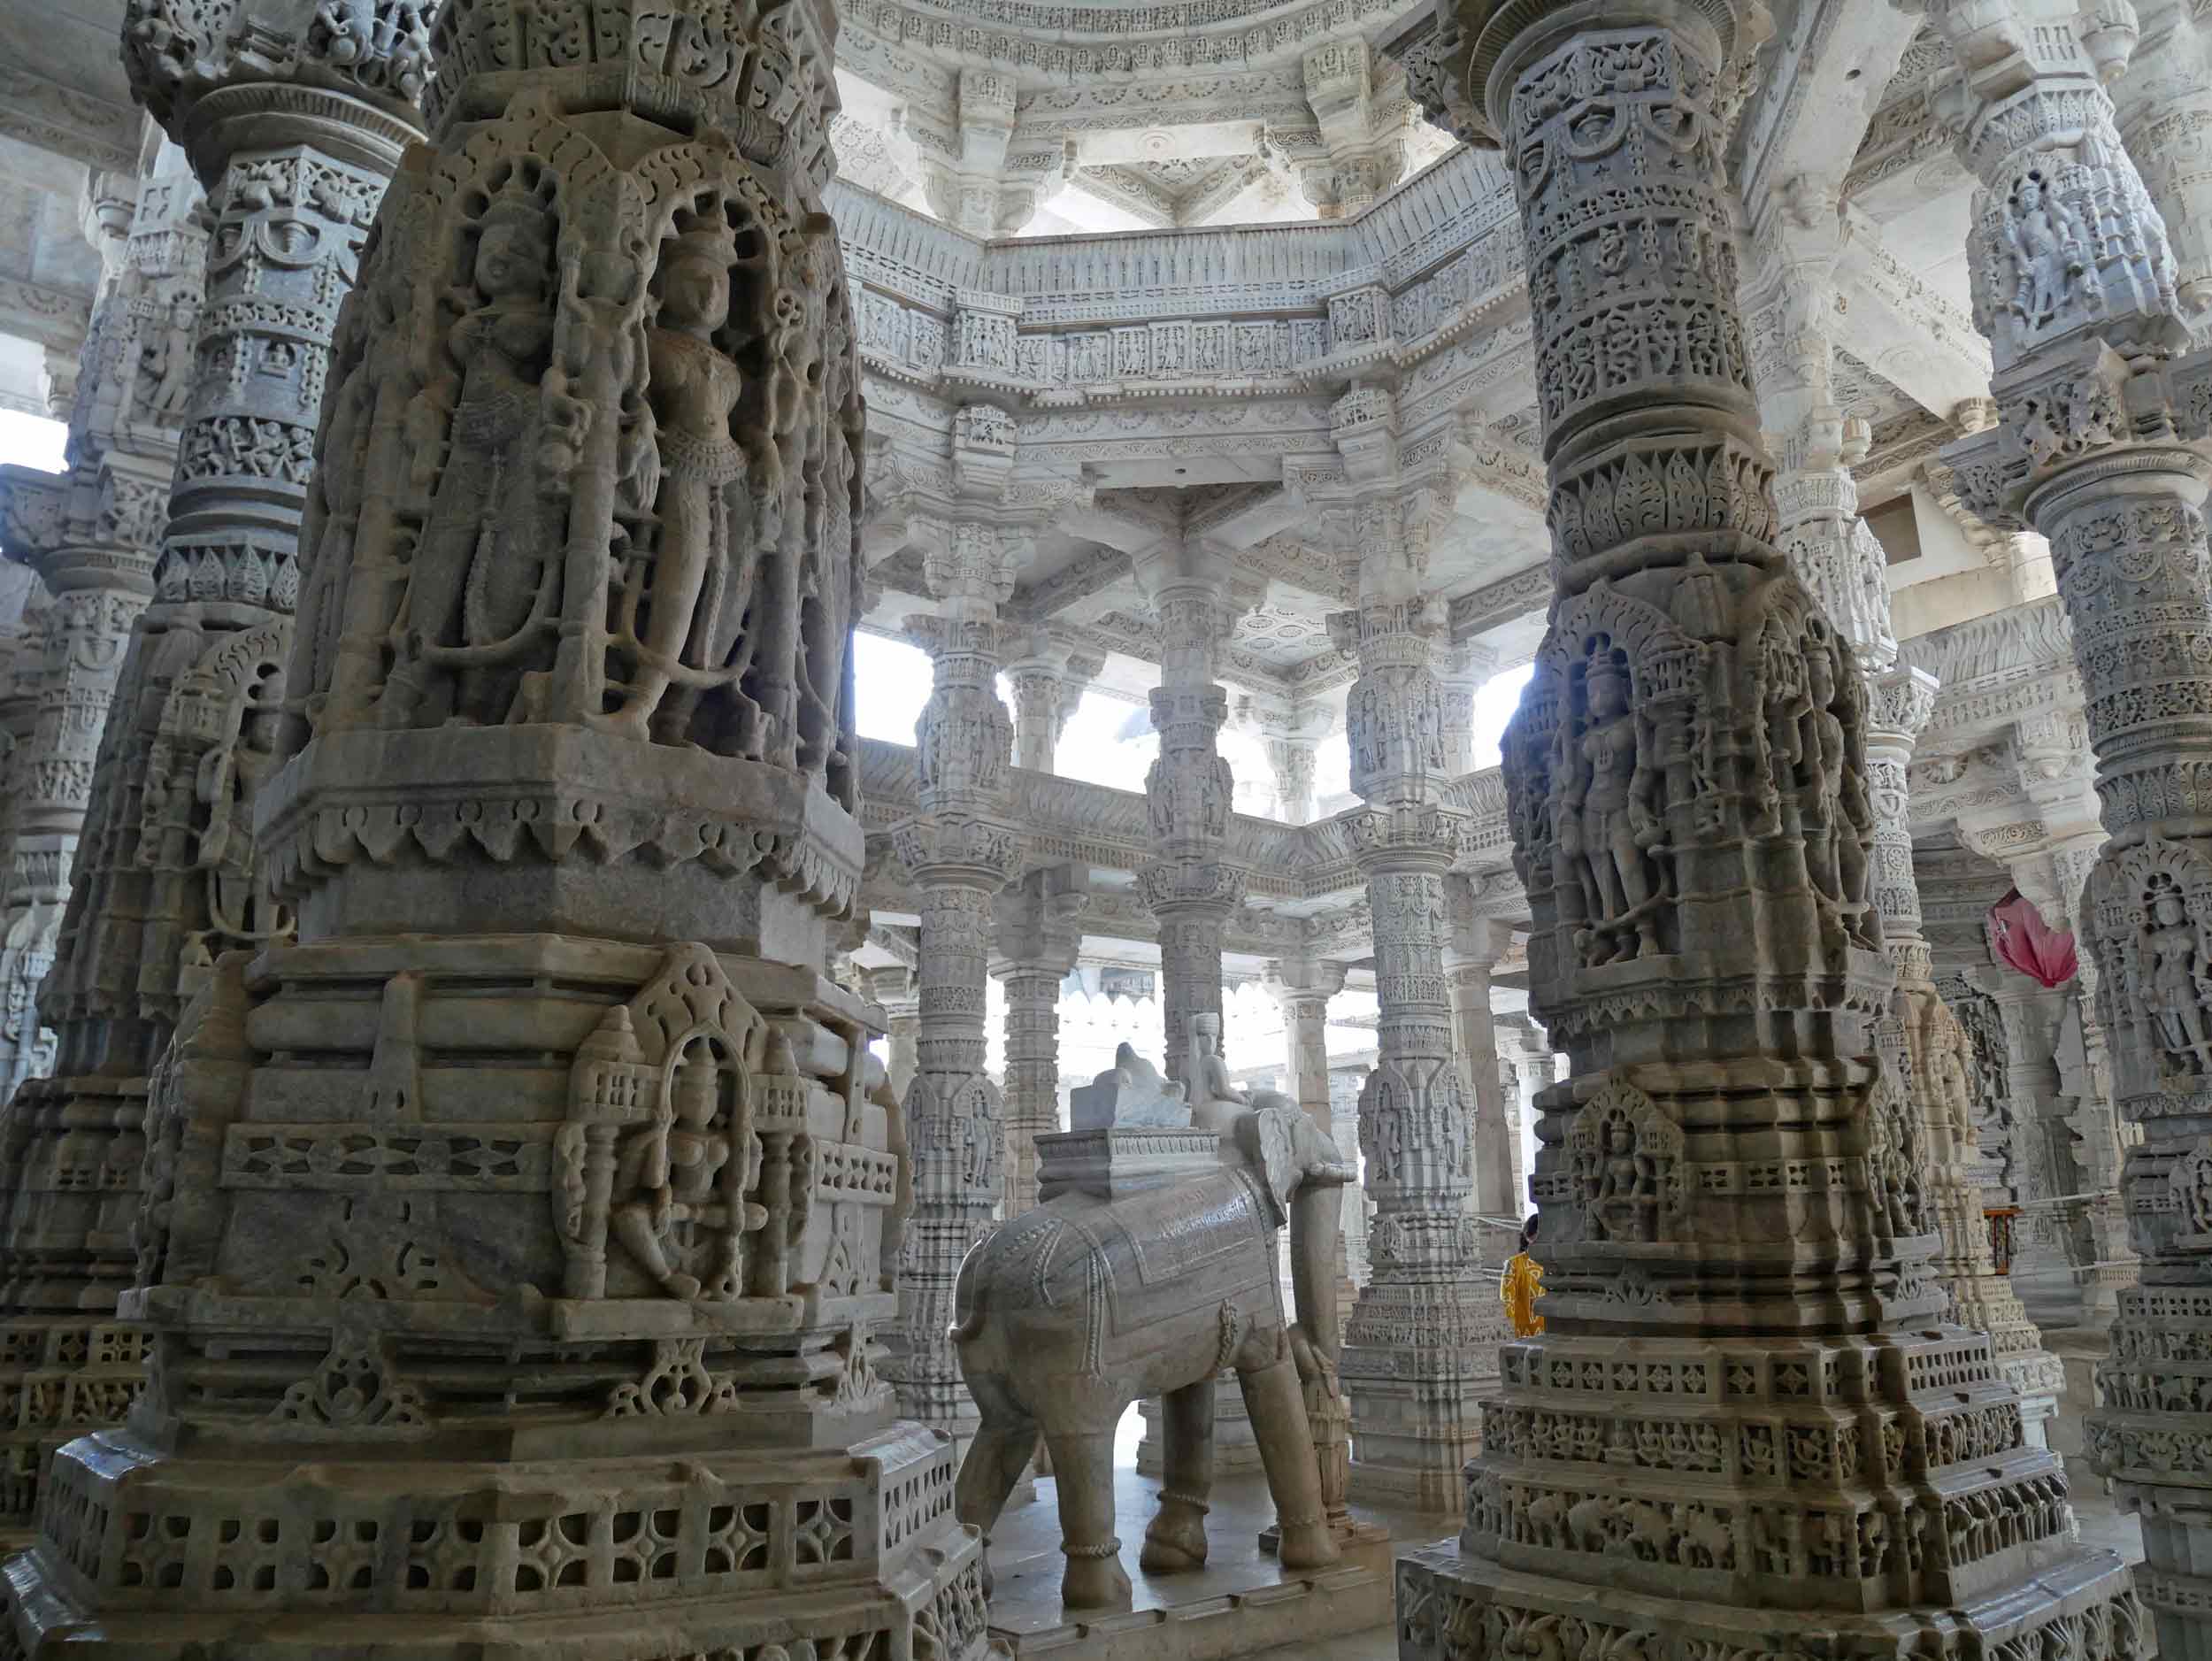  En route to Udaipur from Jodhpur, we made the wise choice to stop at the beautiful Ranakpur Jain Temple (Nov 13). 